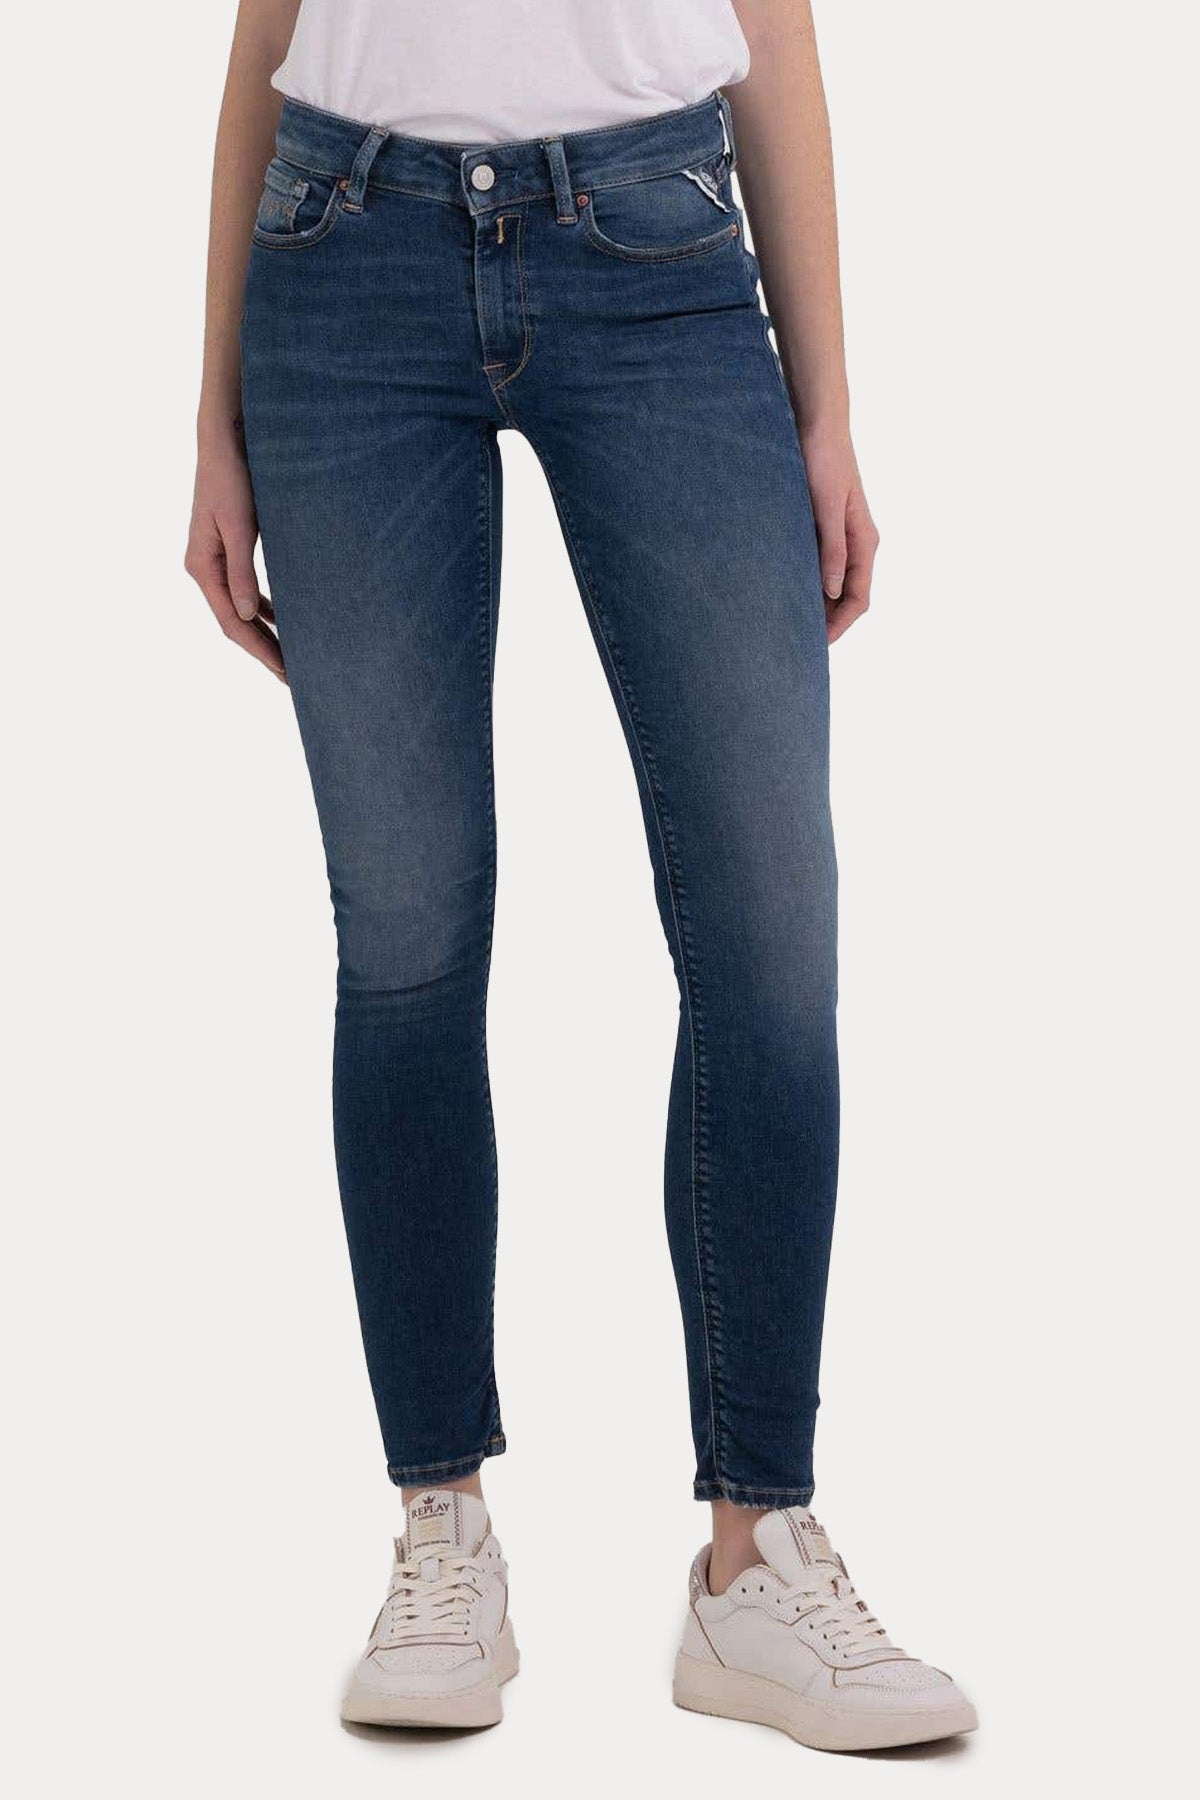 Replay Hyperflex Re-Used New Luz Skinny Fit Jeans